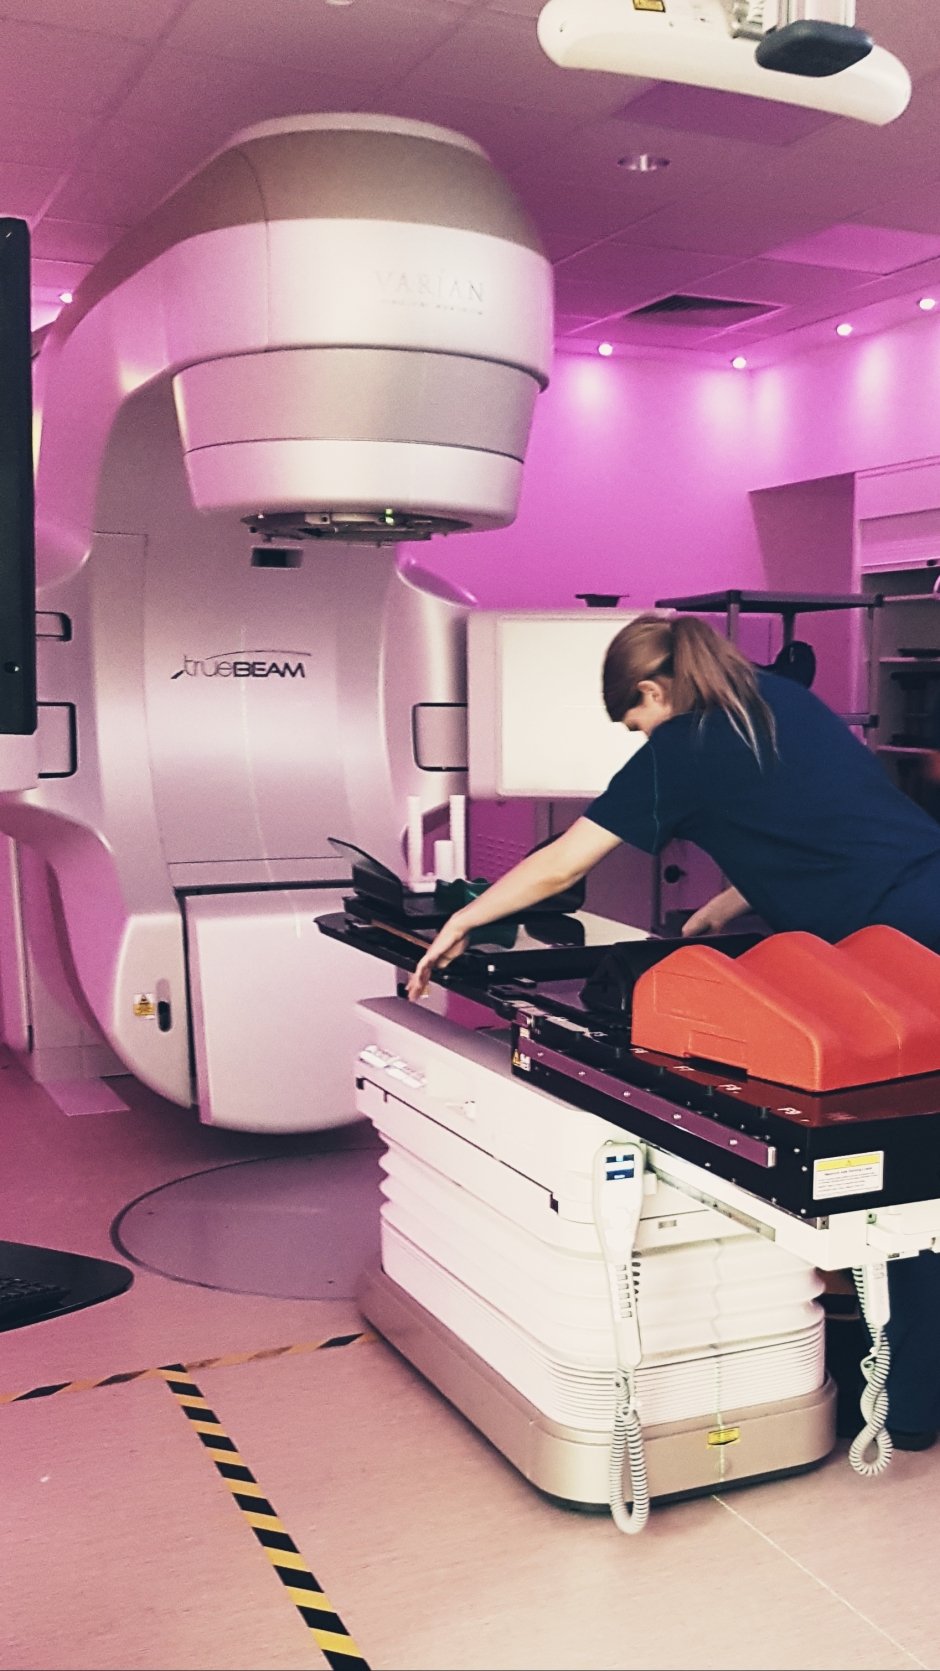 Will I Need Radiotherapy After Chemo?